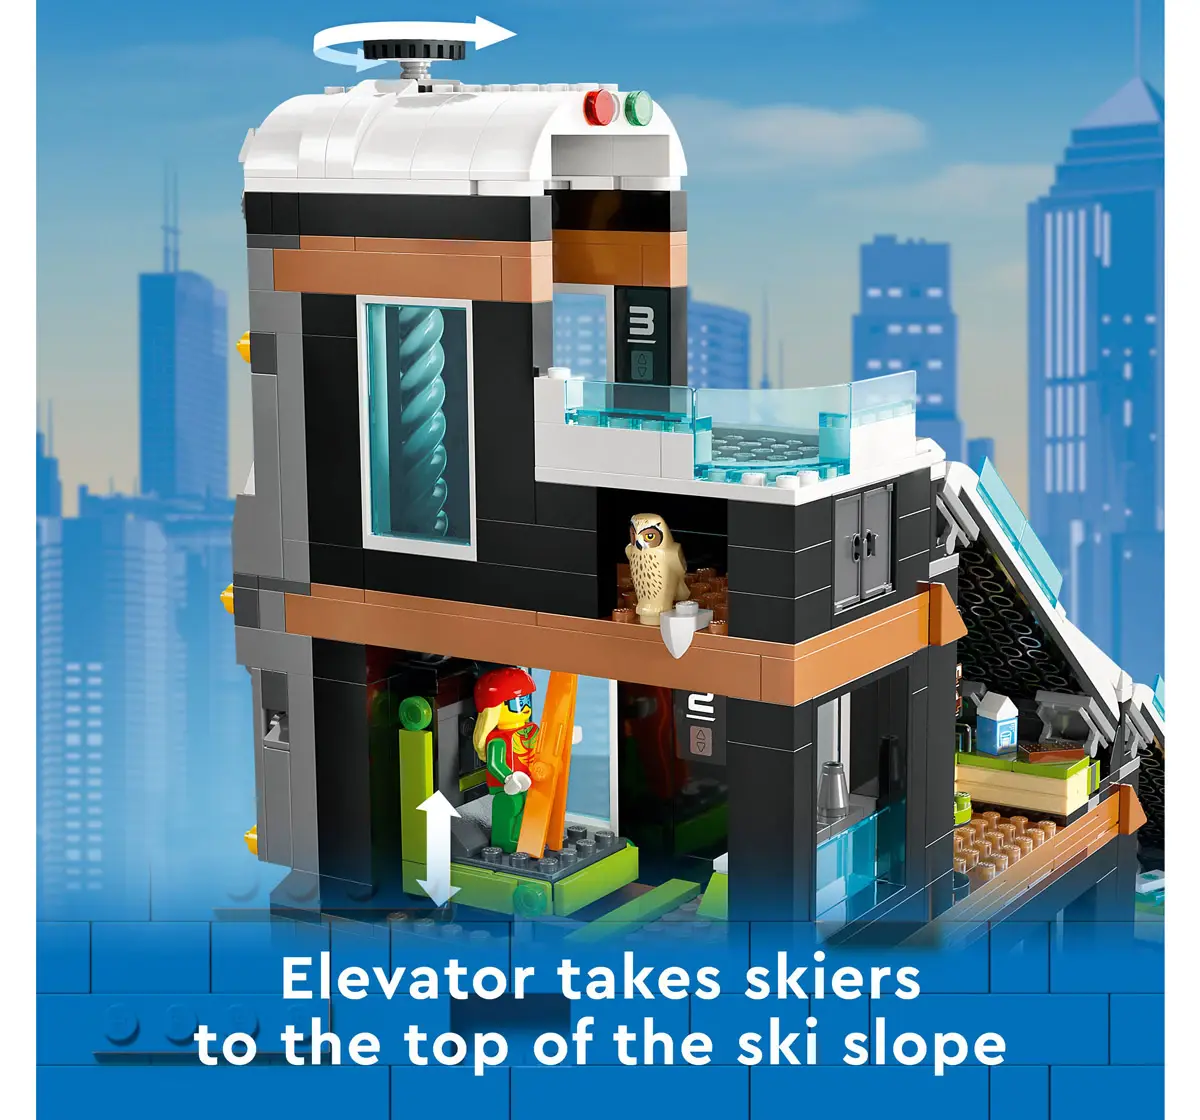 Lego City Ski And Climbing Center 60366 Building Toy Set Multicolour For Kids Ages 7Y+ (1,054 Pieces)